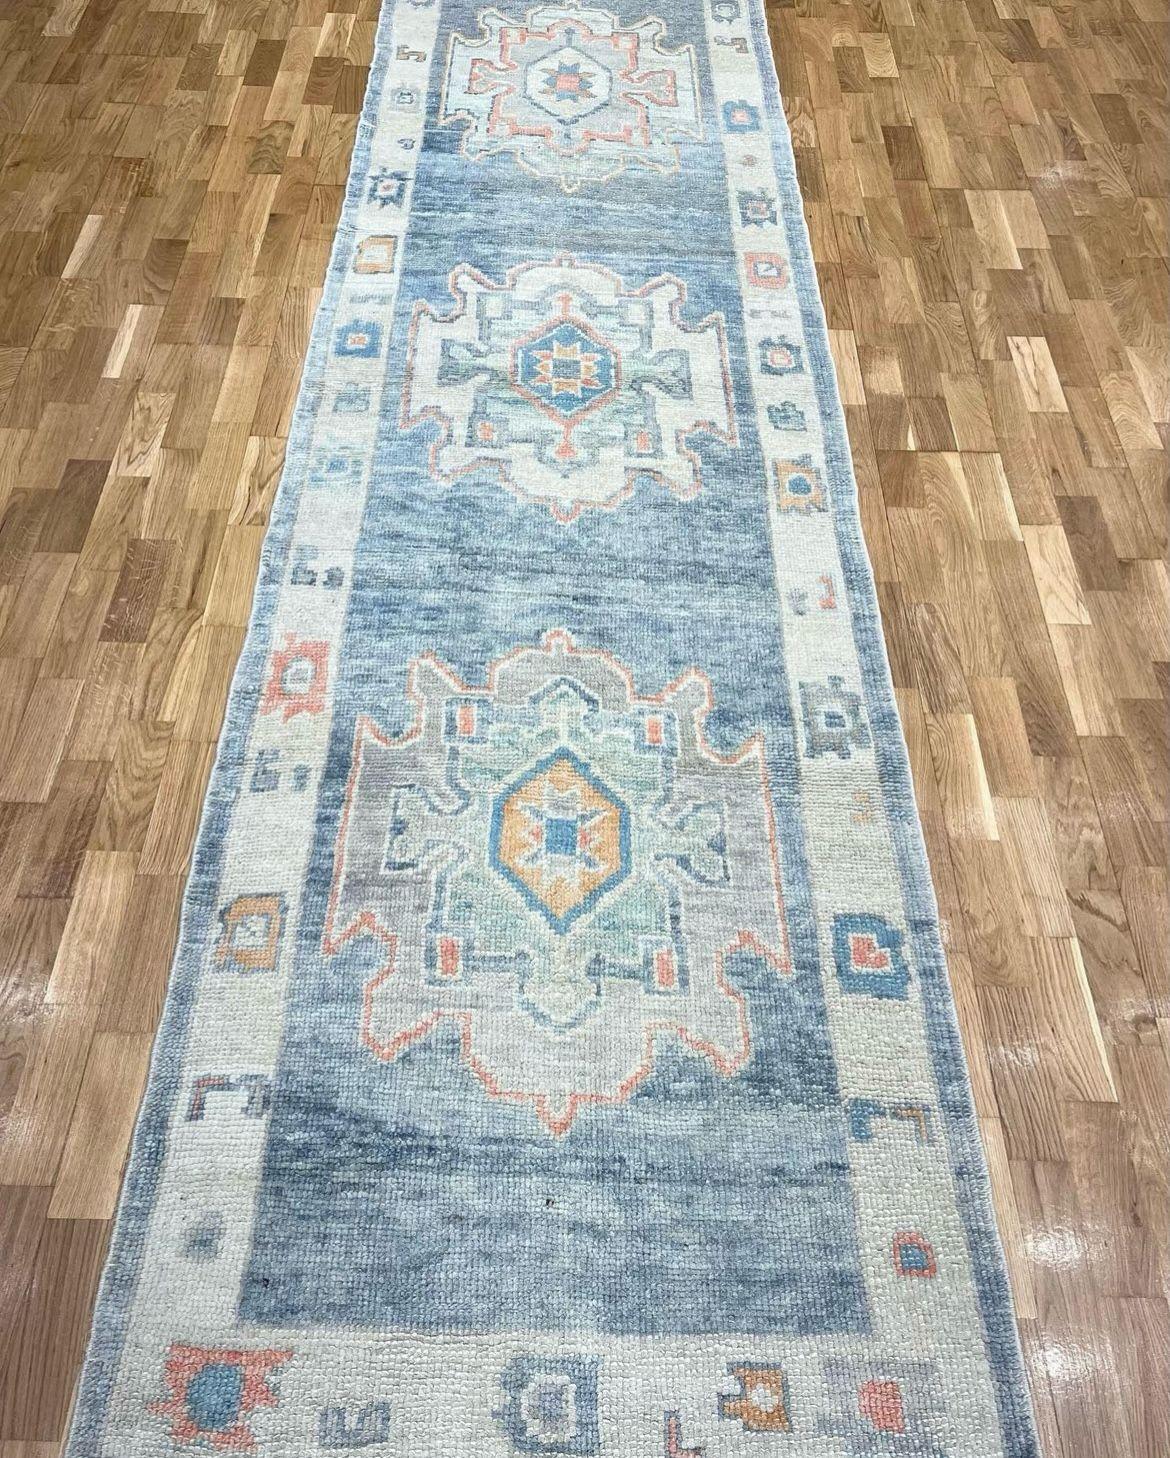 Handwoven Wool Turkish Rug Oushak Runner 2’9” x 10’5” #CB03 In Excellent Condition For Sale In Houston, TX